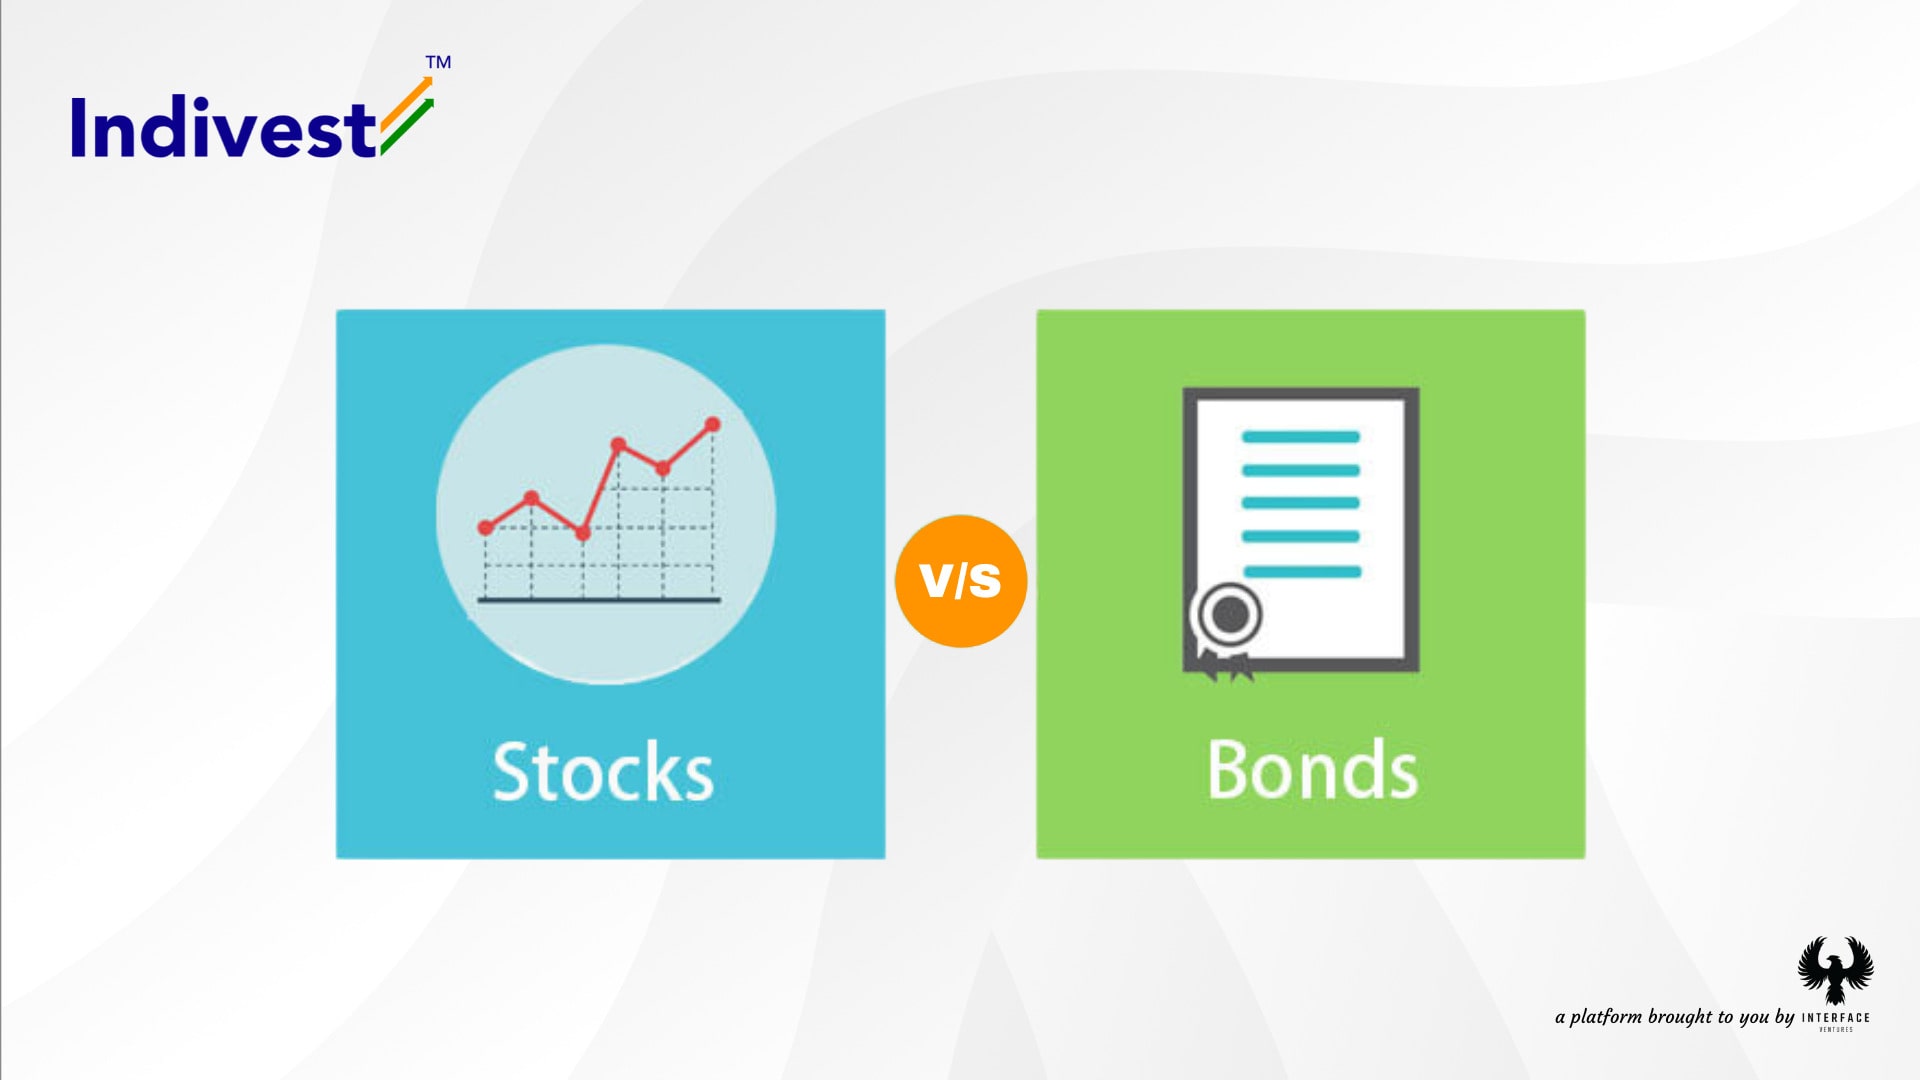 Bonds and stocks in India